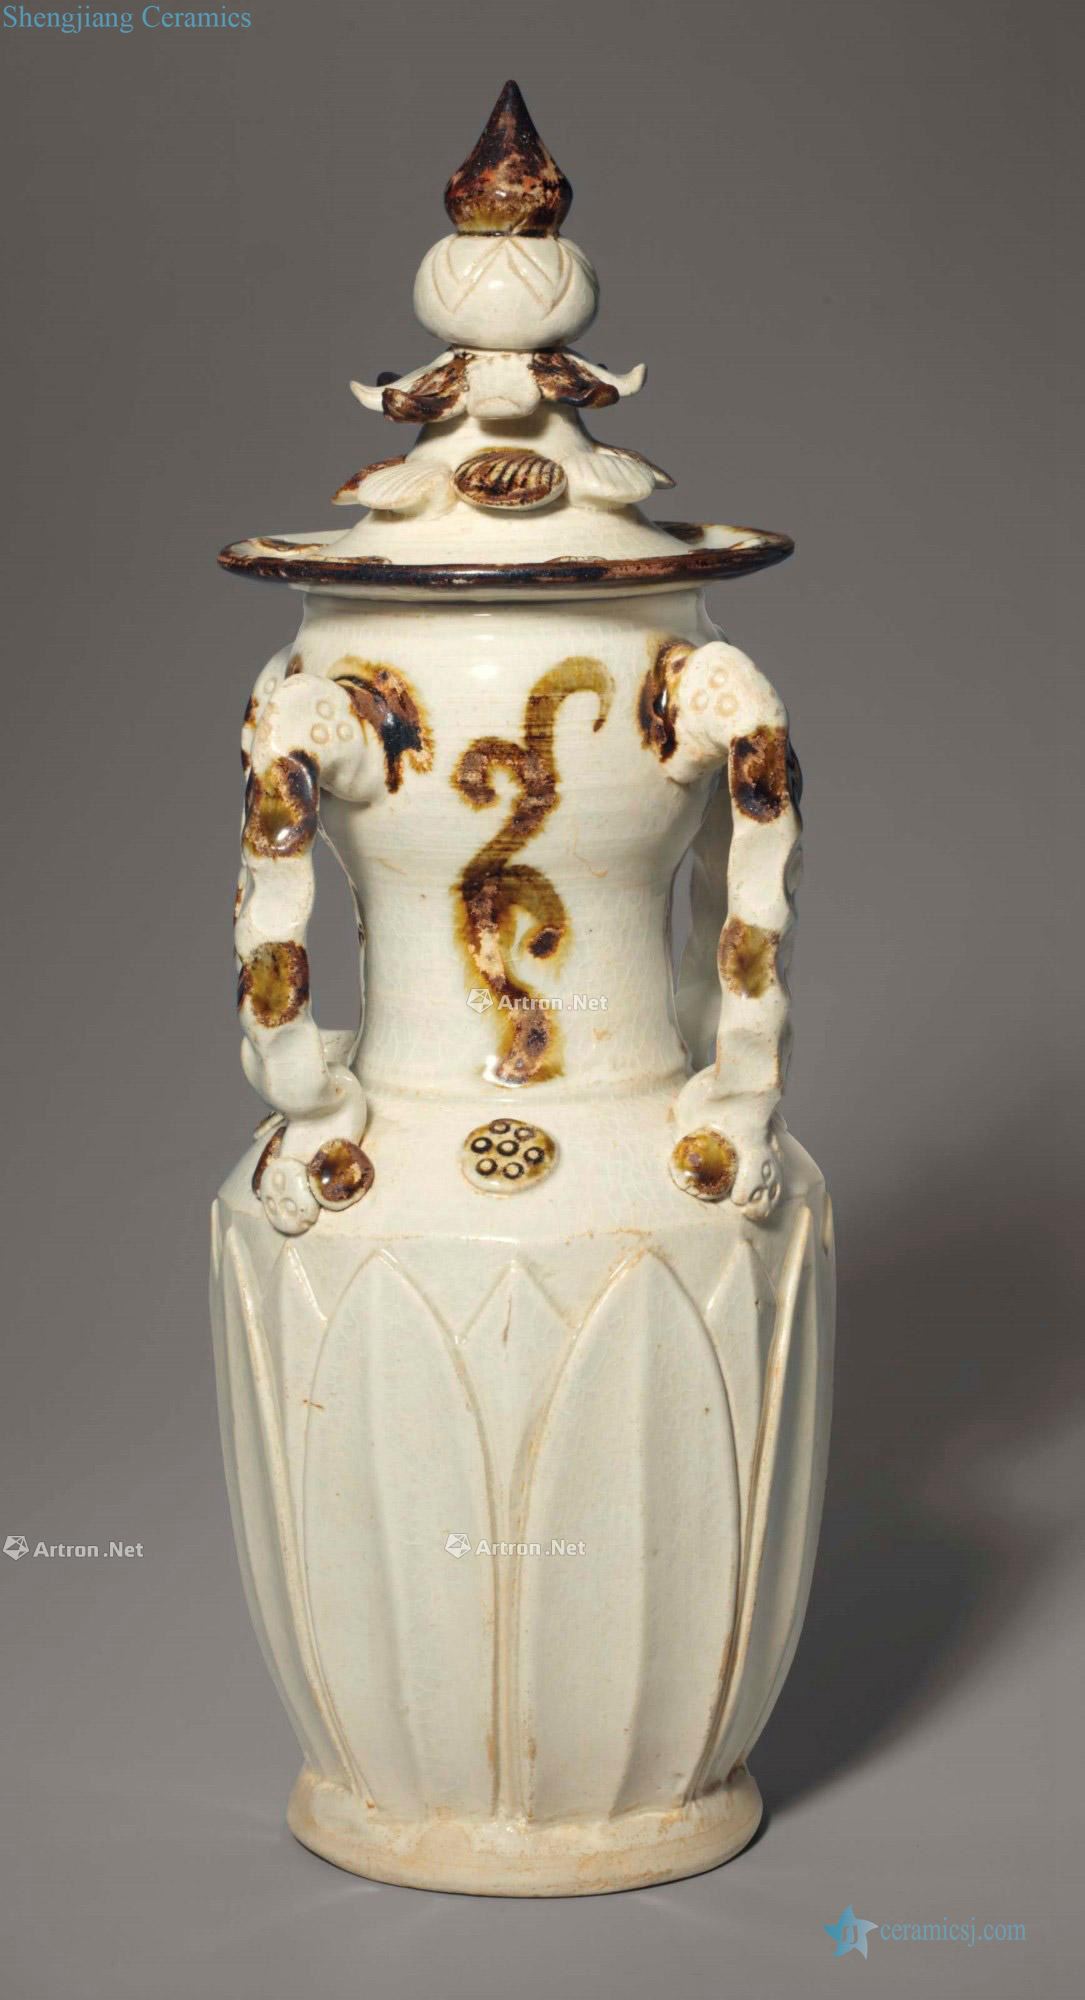 SONG DYNASTY (AD 960 ~ 960), A BROWN - SPOTTED QINGBAI JAR AND COVER